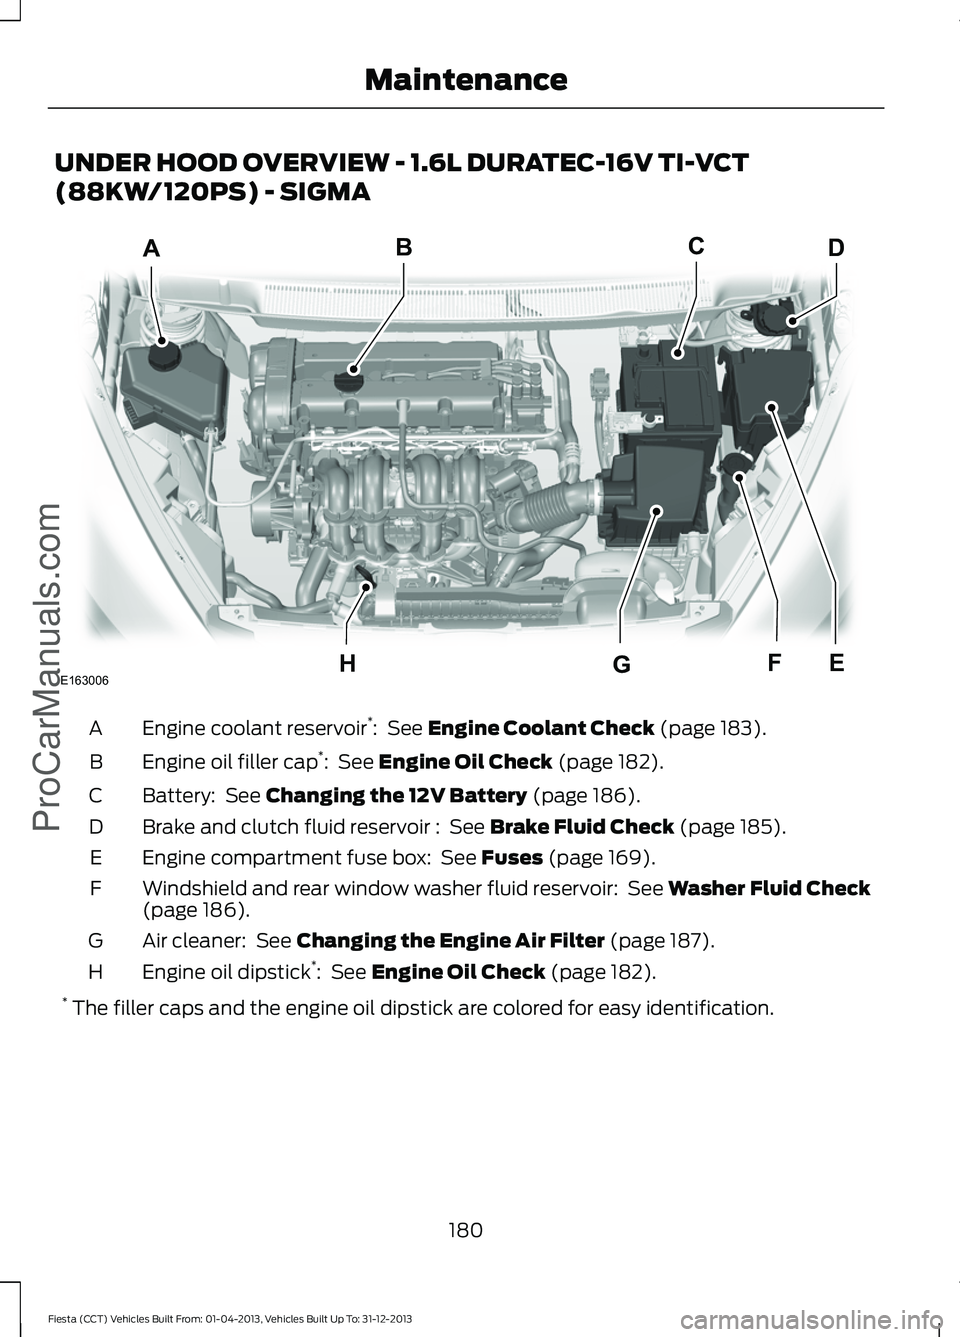 FORD FIESTA 2014  Owners Manual UNDER HOOD OVERVIEW - 1.6L DURATEC-16V TI-VCT
(88KW/120PS) - SIGMA
Engine coolant reservoir
*
:  See Engine Coolant Check (page 183).
A
Engine oil filler cap *
: 
 See Engine Oil Check (page 182).
B
B